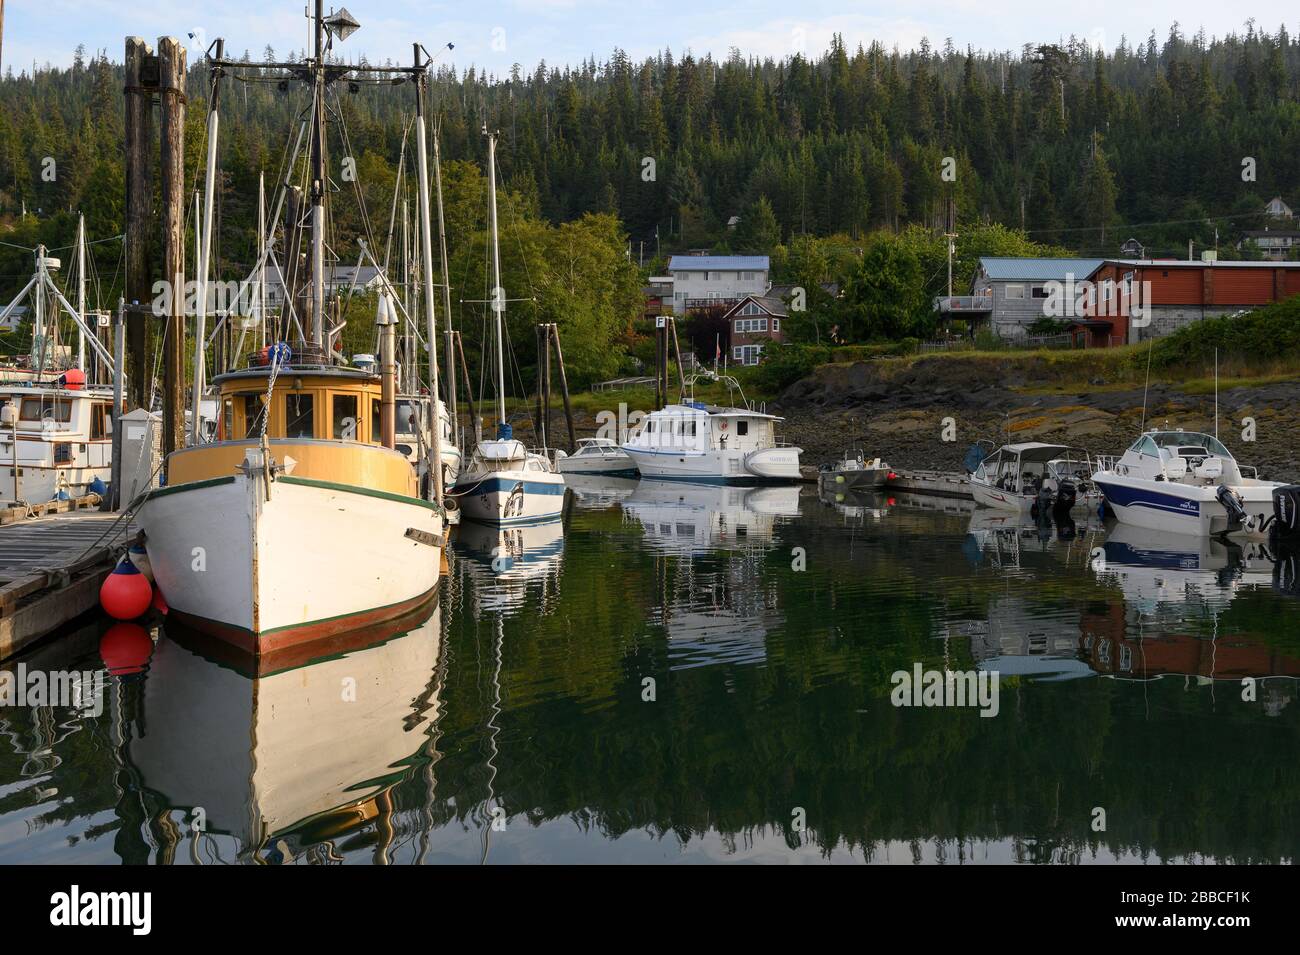 Fisherman's Wharf, Queen Charlotte City, Haida Gwaii, Formerly known as Queen Charlotte Islands, British Columbia, Canada Stock Photo